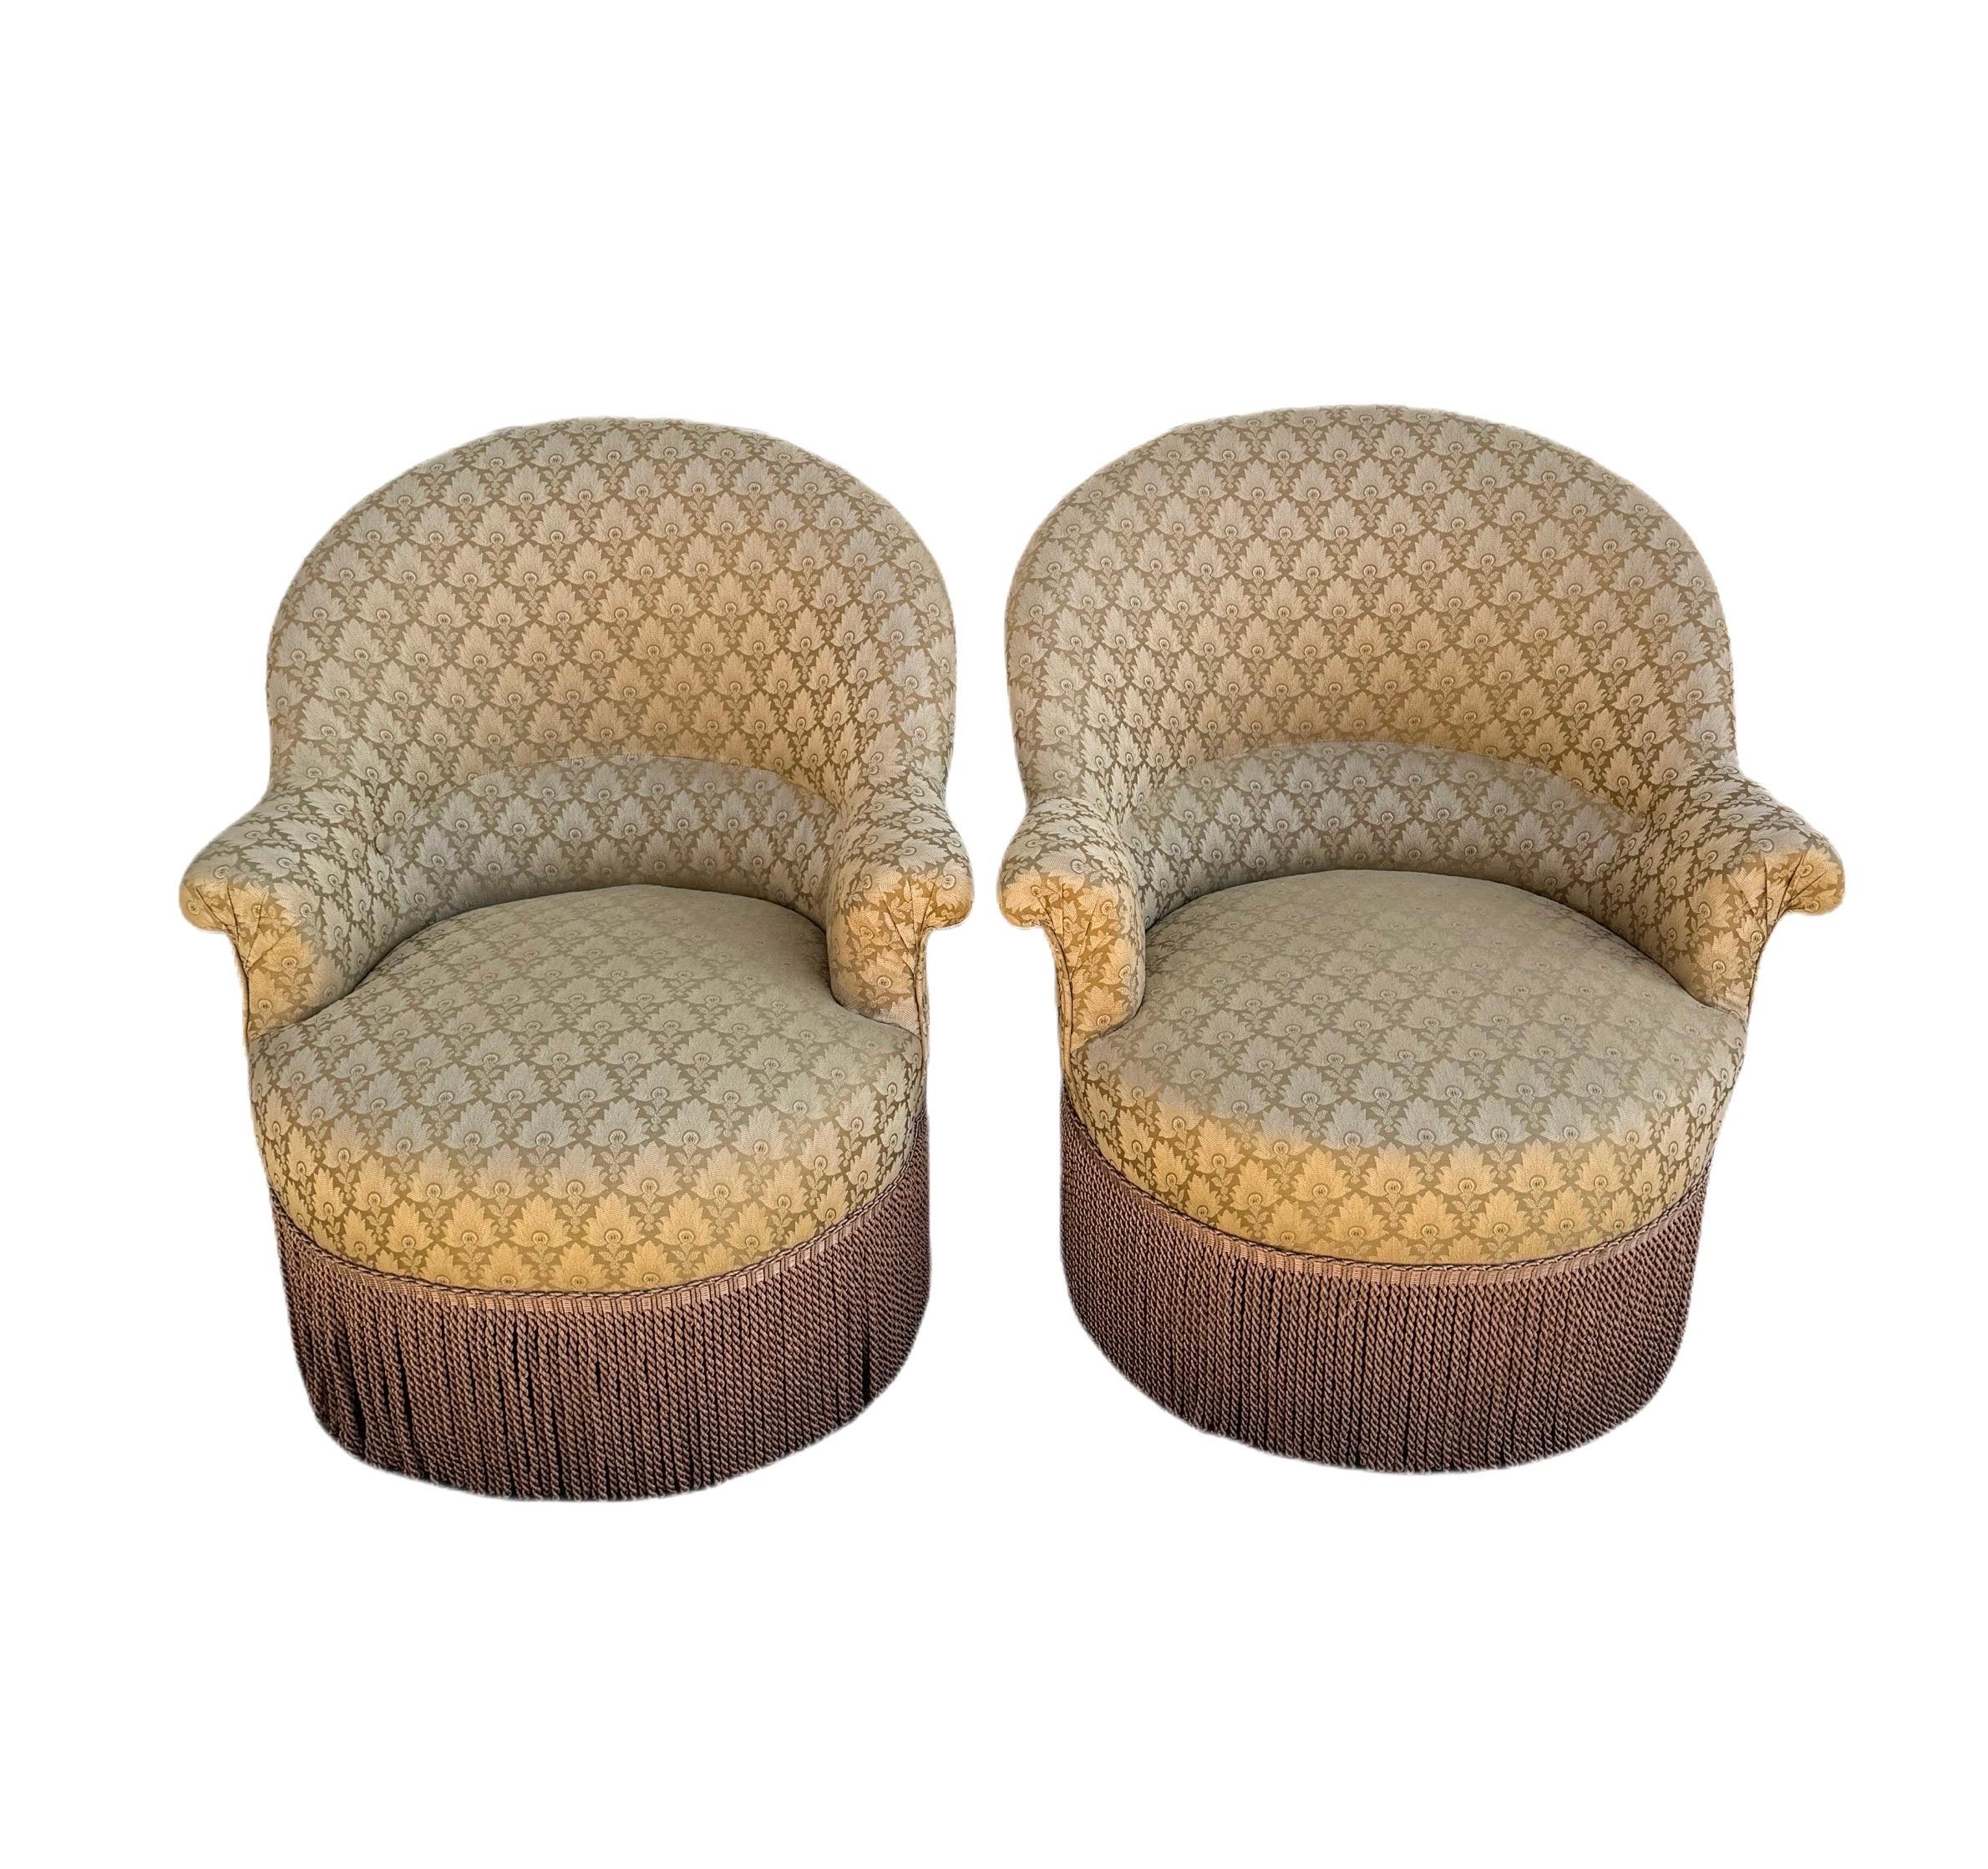 stunning pair of vintage Art Deco style chairs, beautifully upholstered in a luxurious gold plume silk damask fabric. These chairs boast an elegant silhouette with a sweeping curved backrest and a plush, rounded seat that invites one to sit and